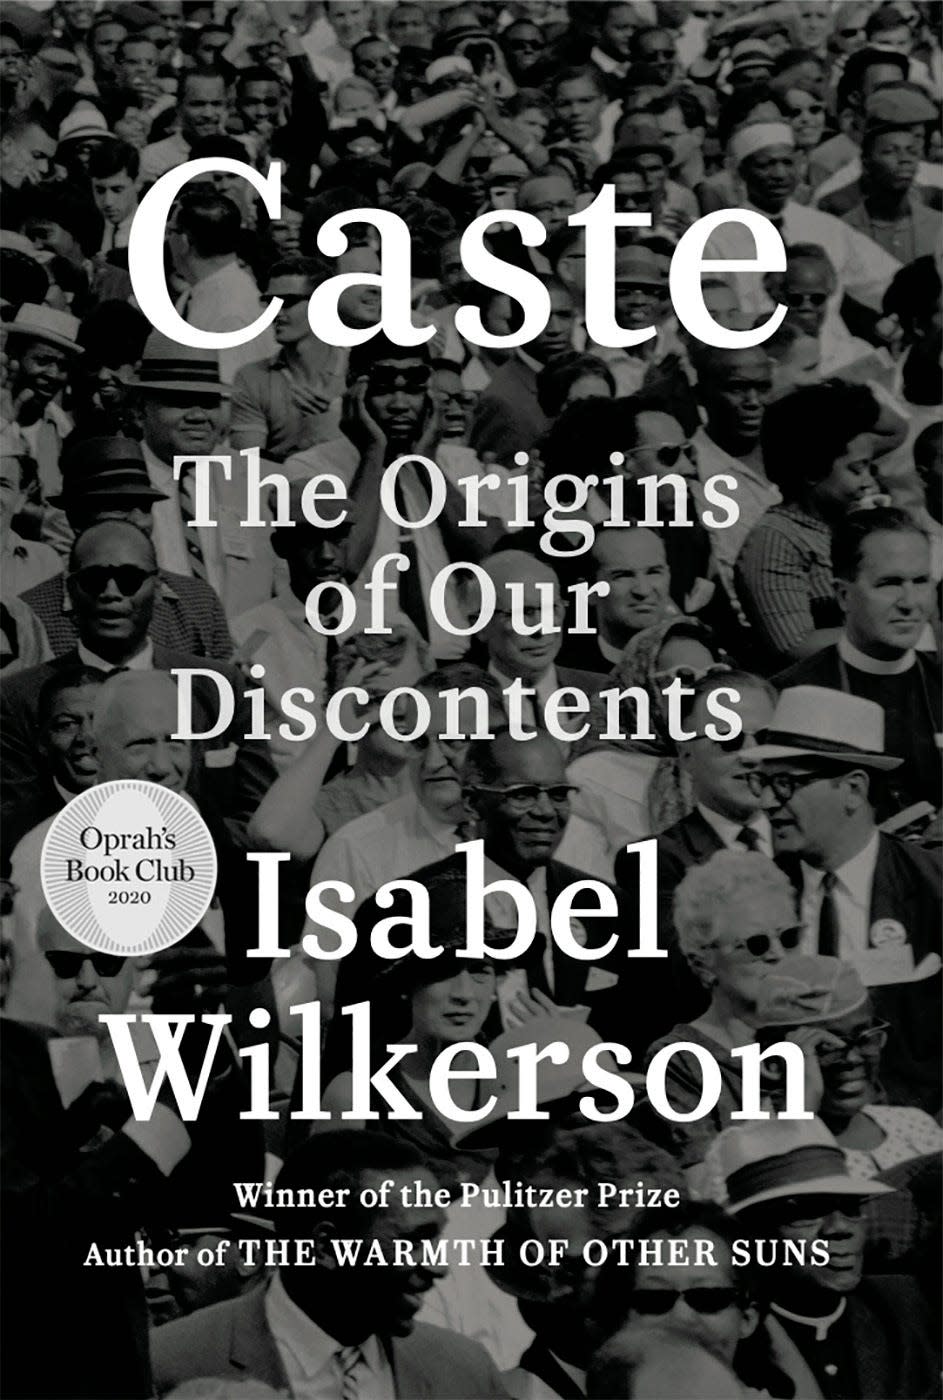 Oprah Winfrey has chosen Isabel Wilkerson’s “Caste: The Origins of Our Discontents” as her new book club selection. The book looks at American history and the treatment of Blacks and finds what she calls an enduring, unseen and unmentioned caste system.